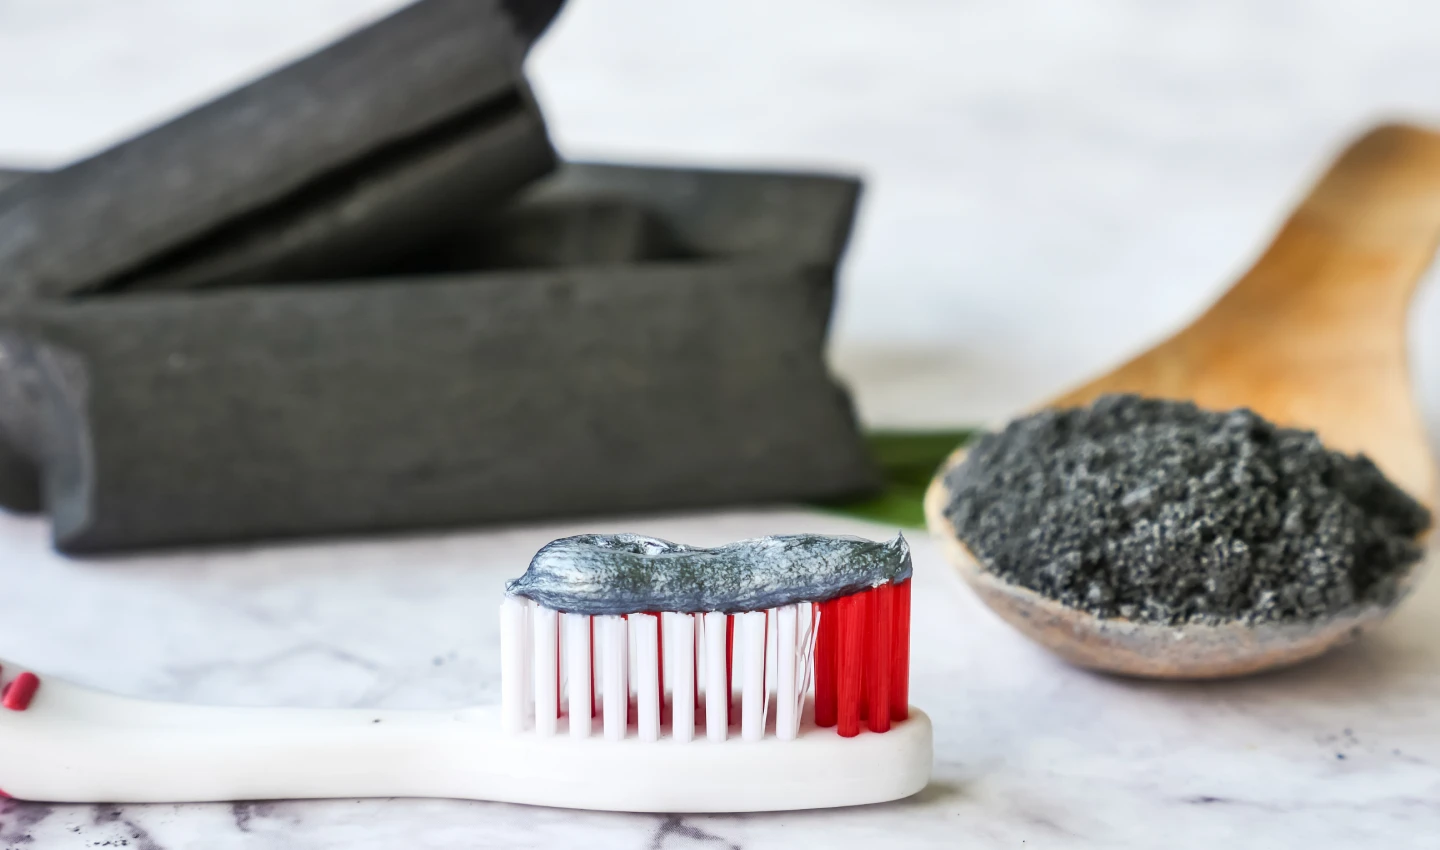 A toothbrush with charcoal toothpaste and charcoal in the background, representing charcoal-infused toothpastes.